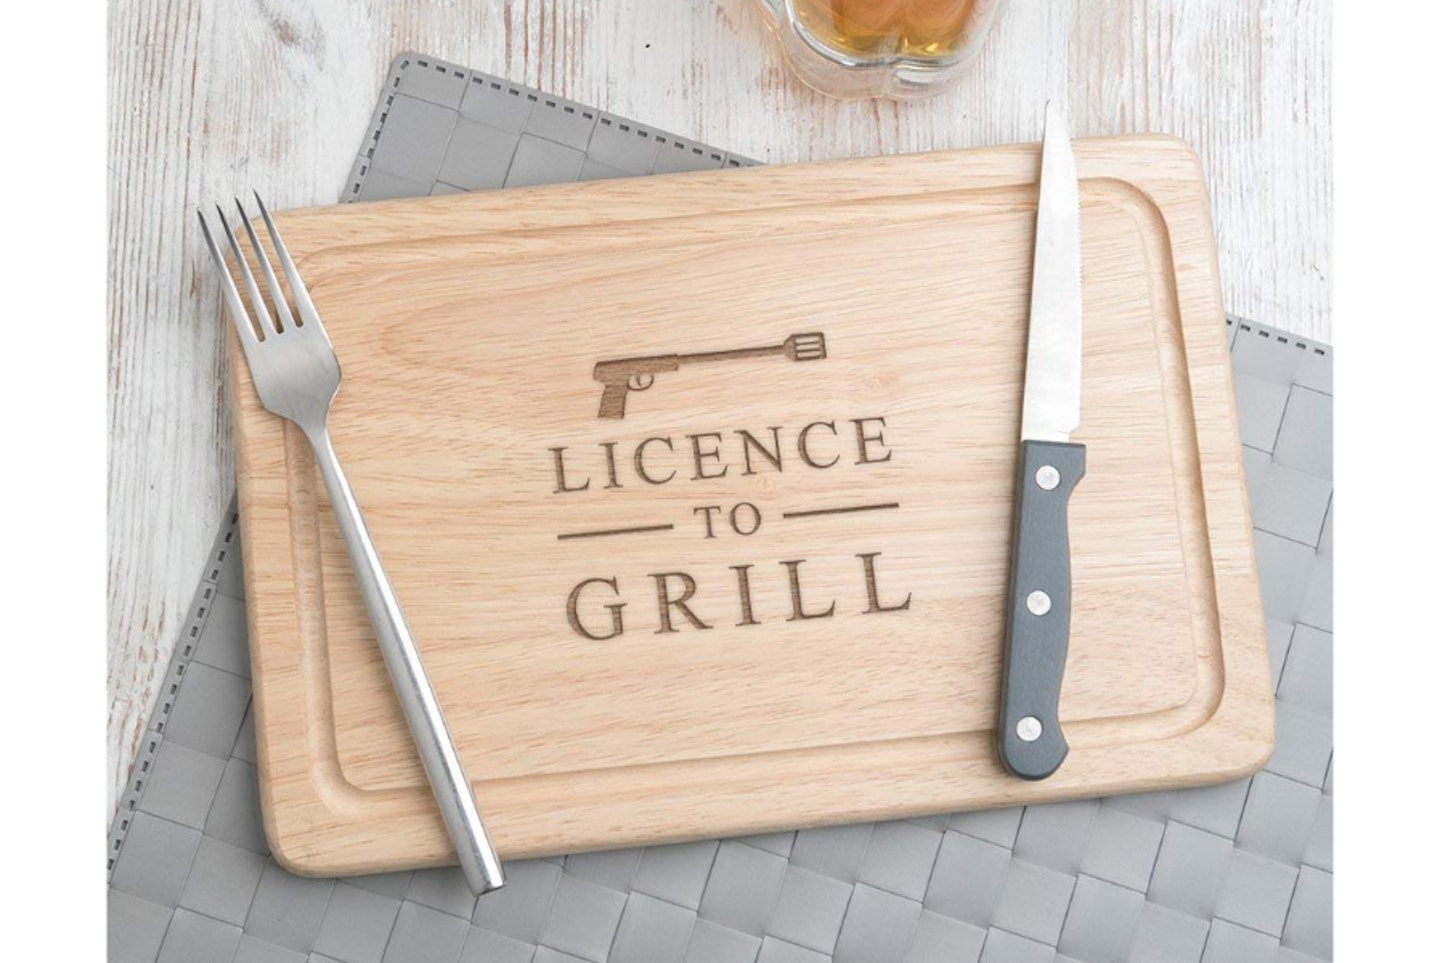 Licence to Grill Wooden Chopping Board, £19.99